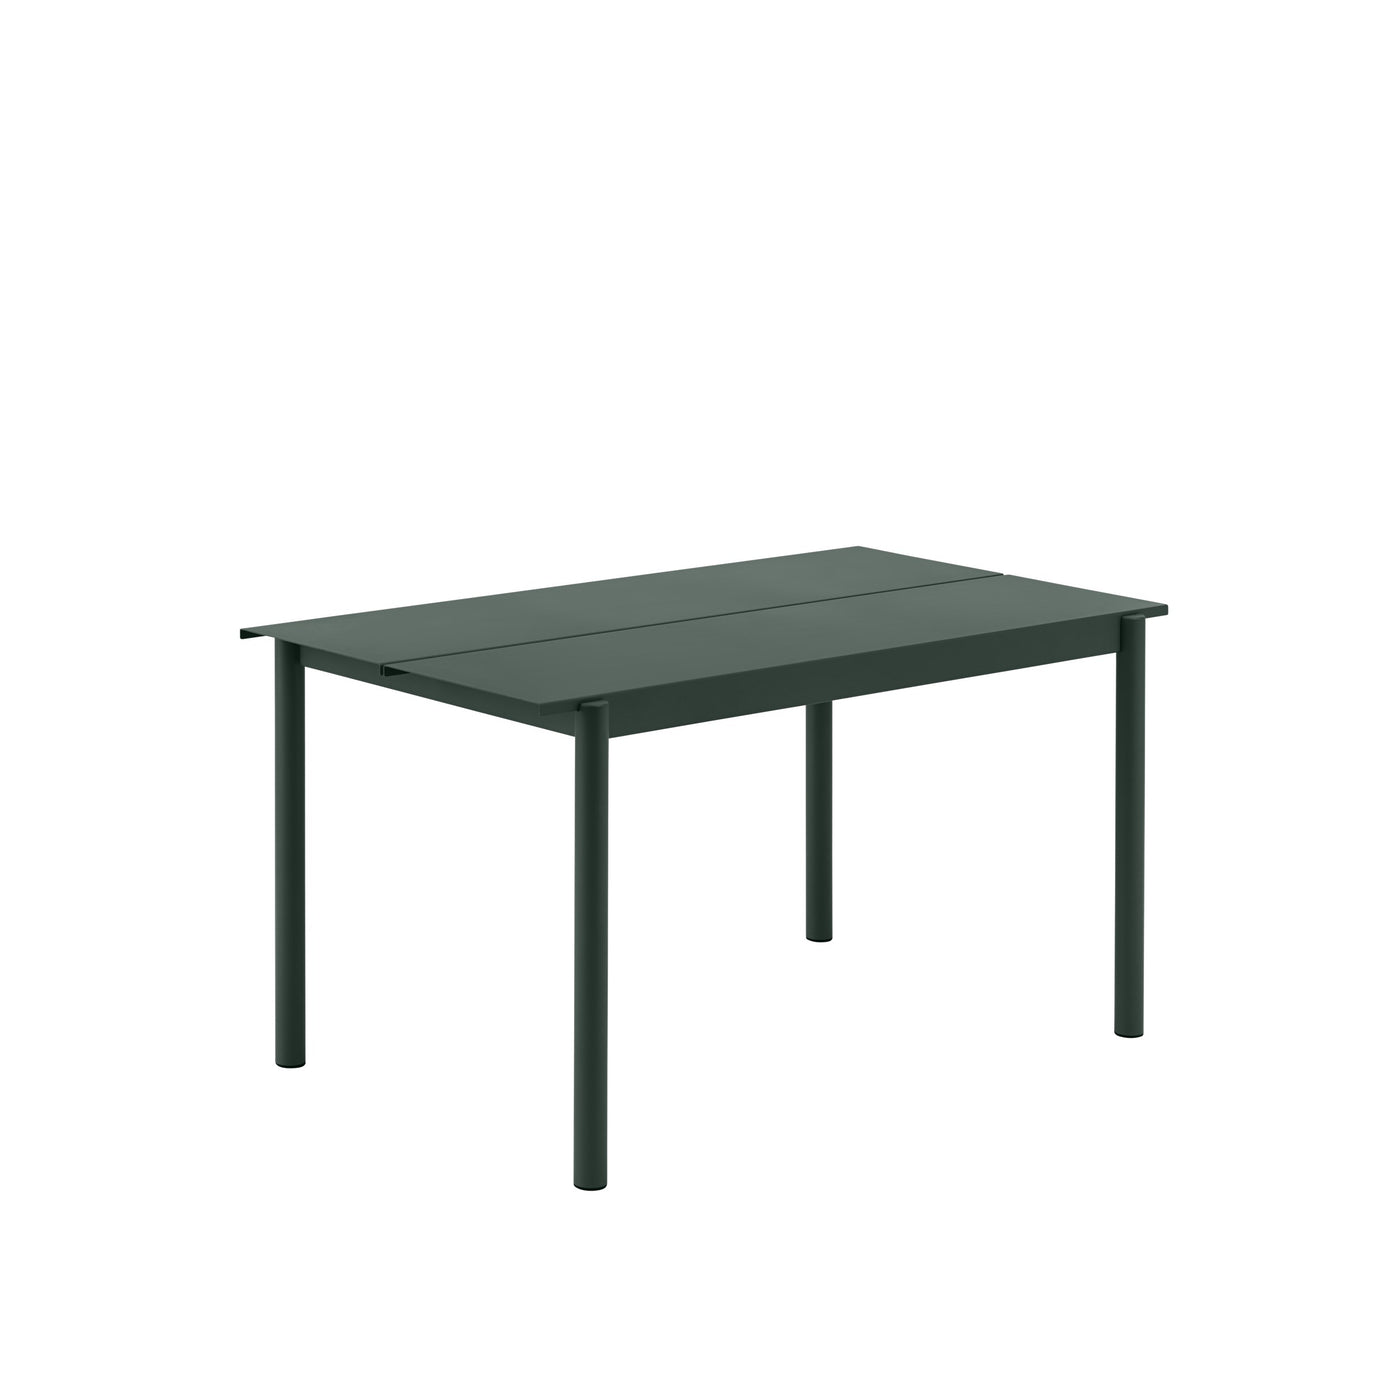 Muuto Linear Steel Table 140x75 in dark green, available from someday designs  #colour_dark-green